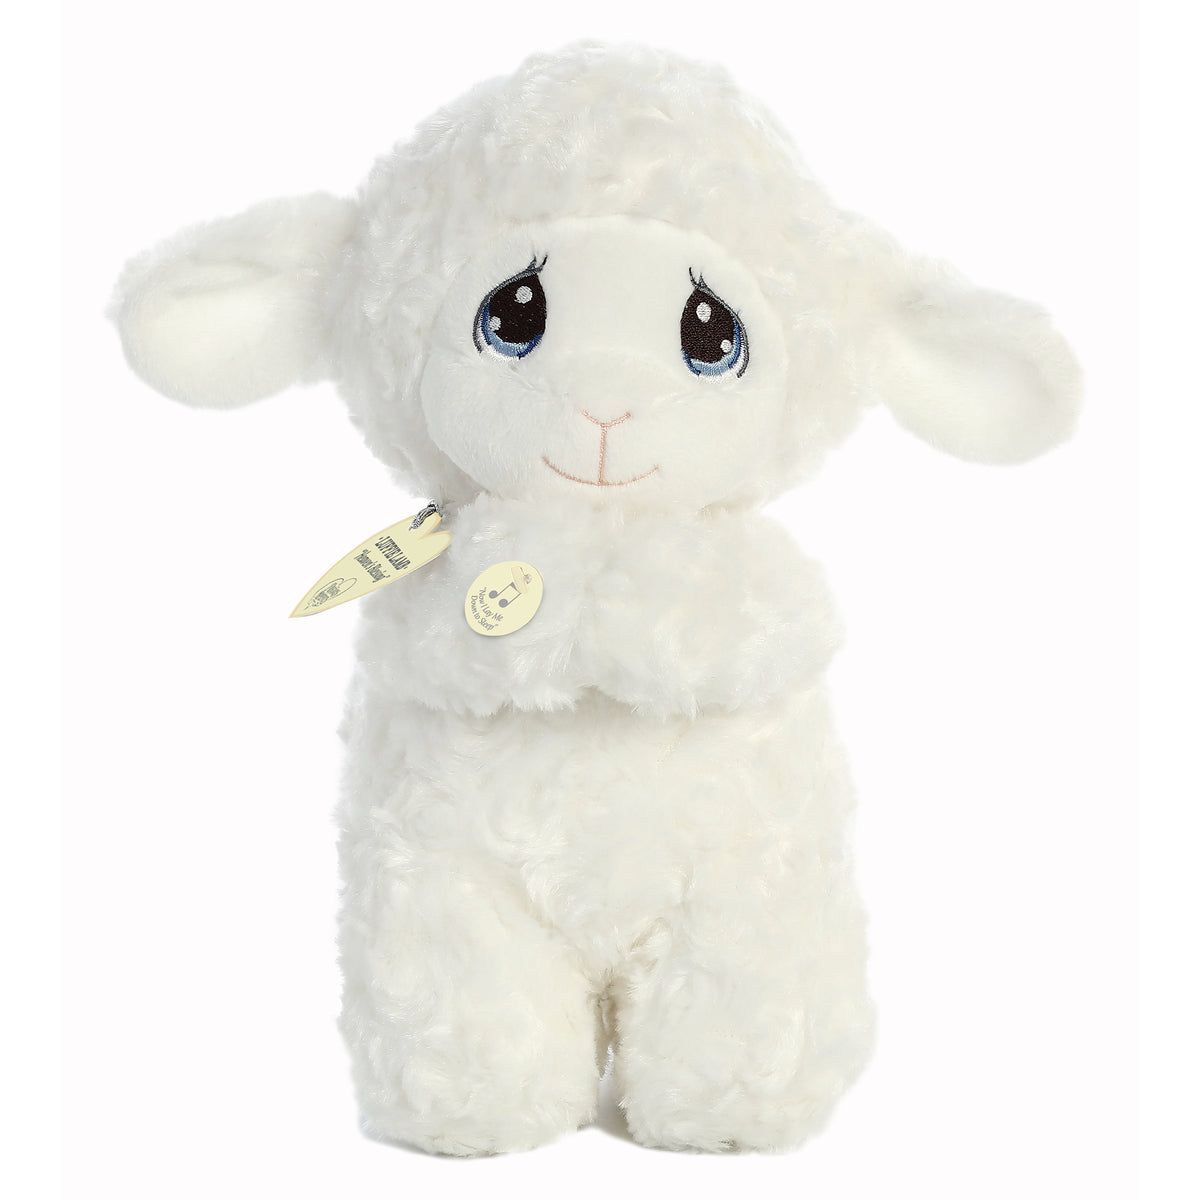 Luffie Praying Lamb from Precious Moments, featuring plush curly fleece and a serene expression, symbolizes love and faith